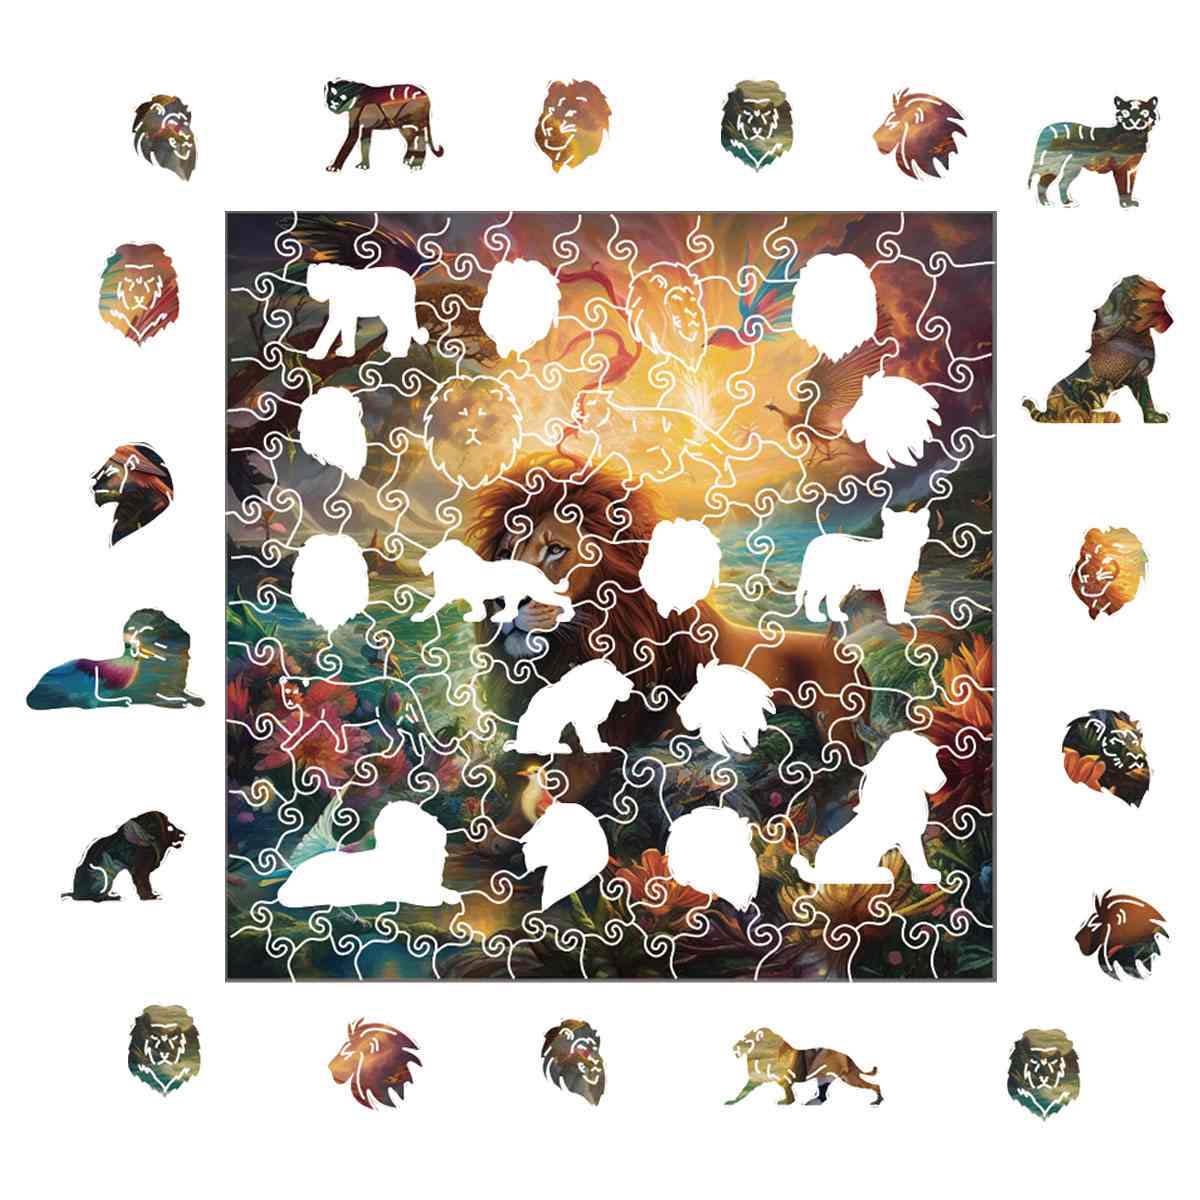 Animal Jigsaw Puzzle > Wooden Jigsaw Puzzle > Jigsaw Puzzle Wild Life - Jigsaw Puzzle